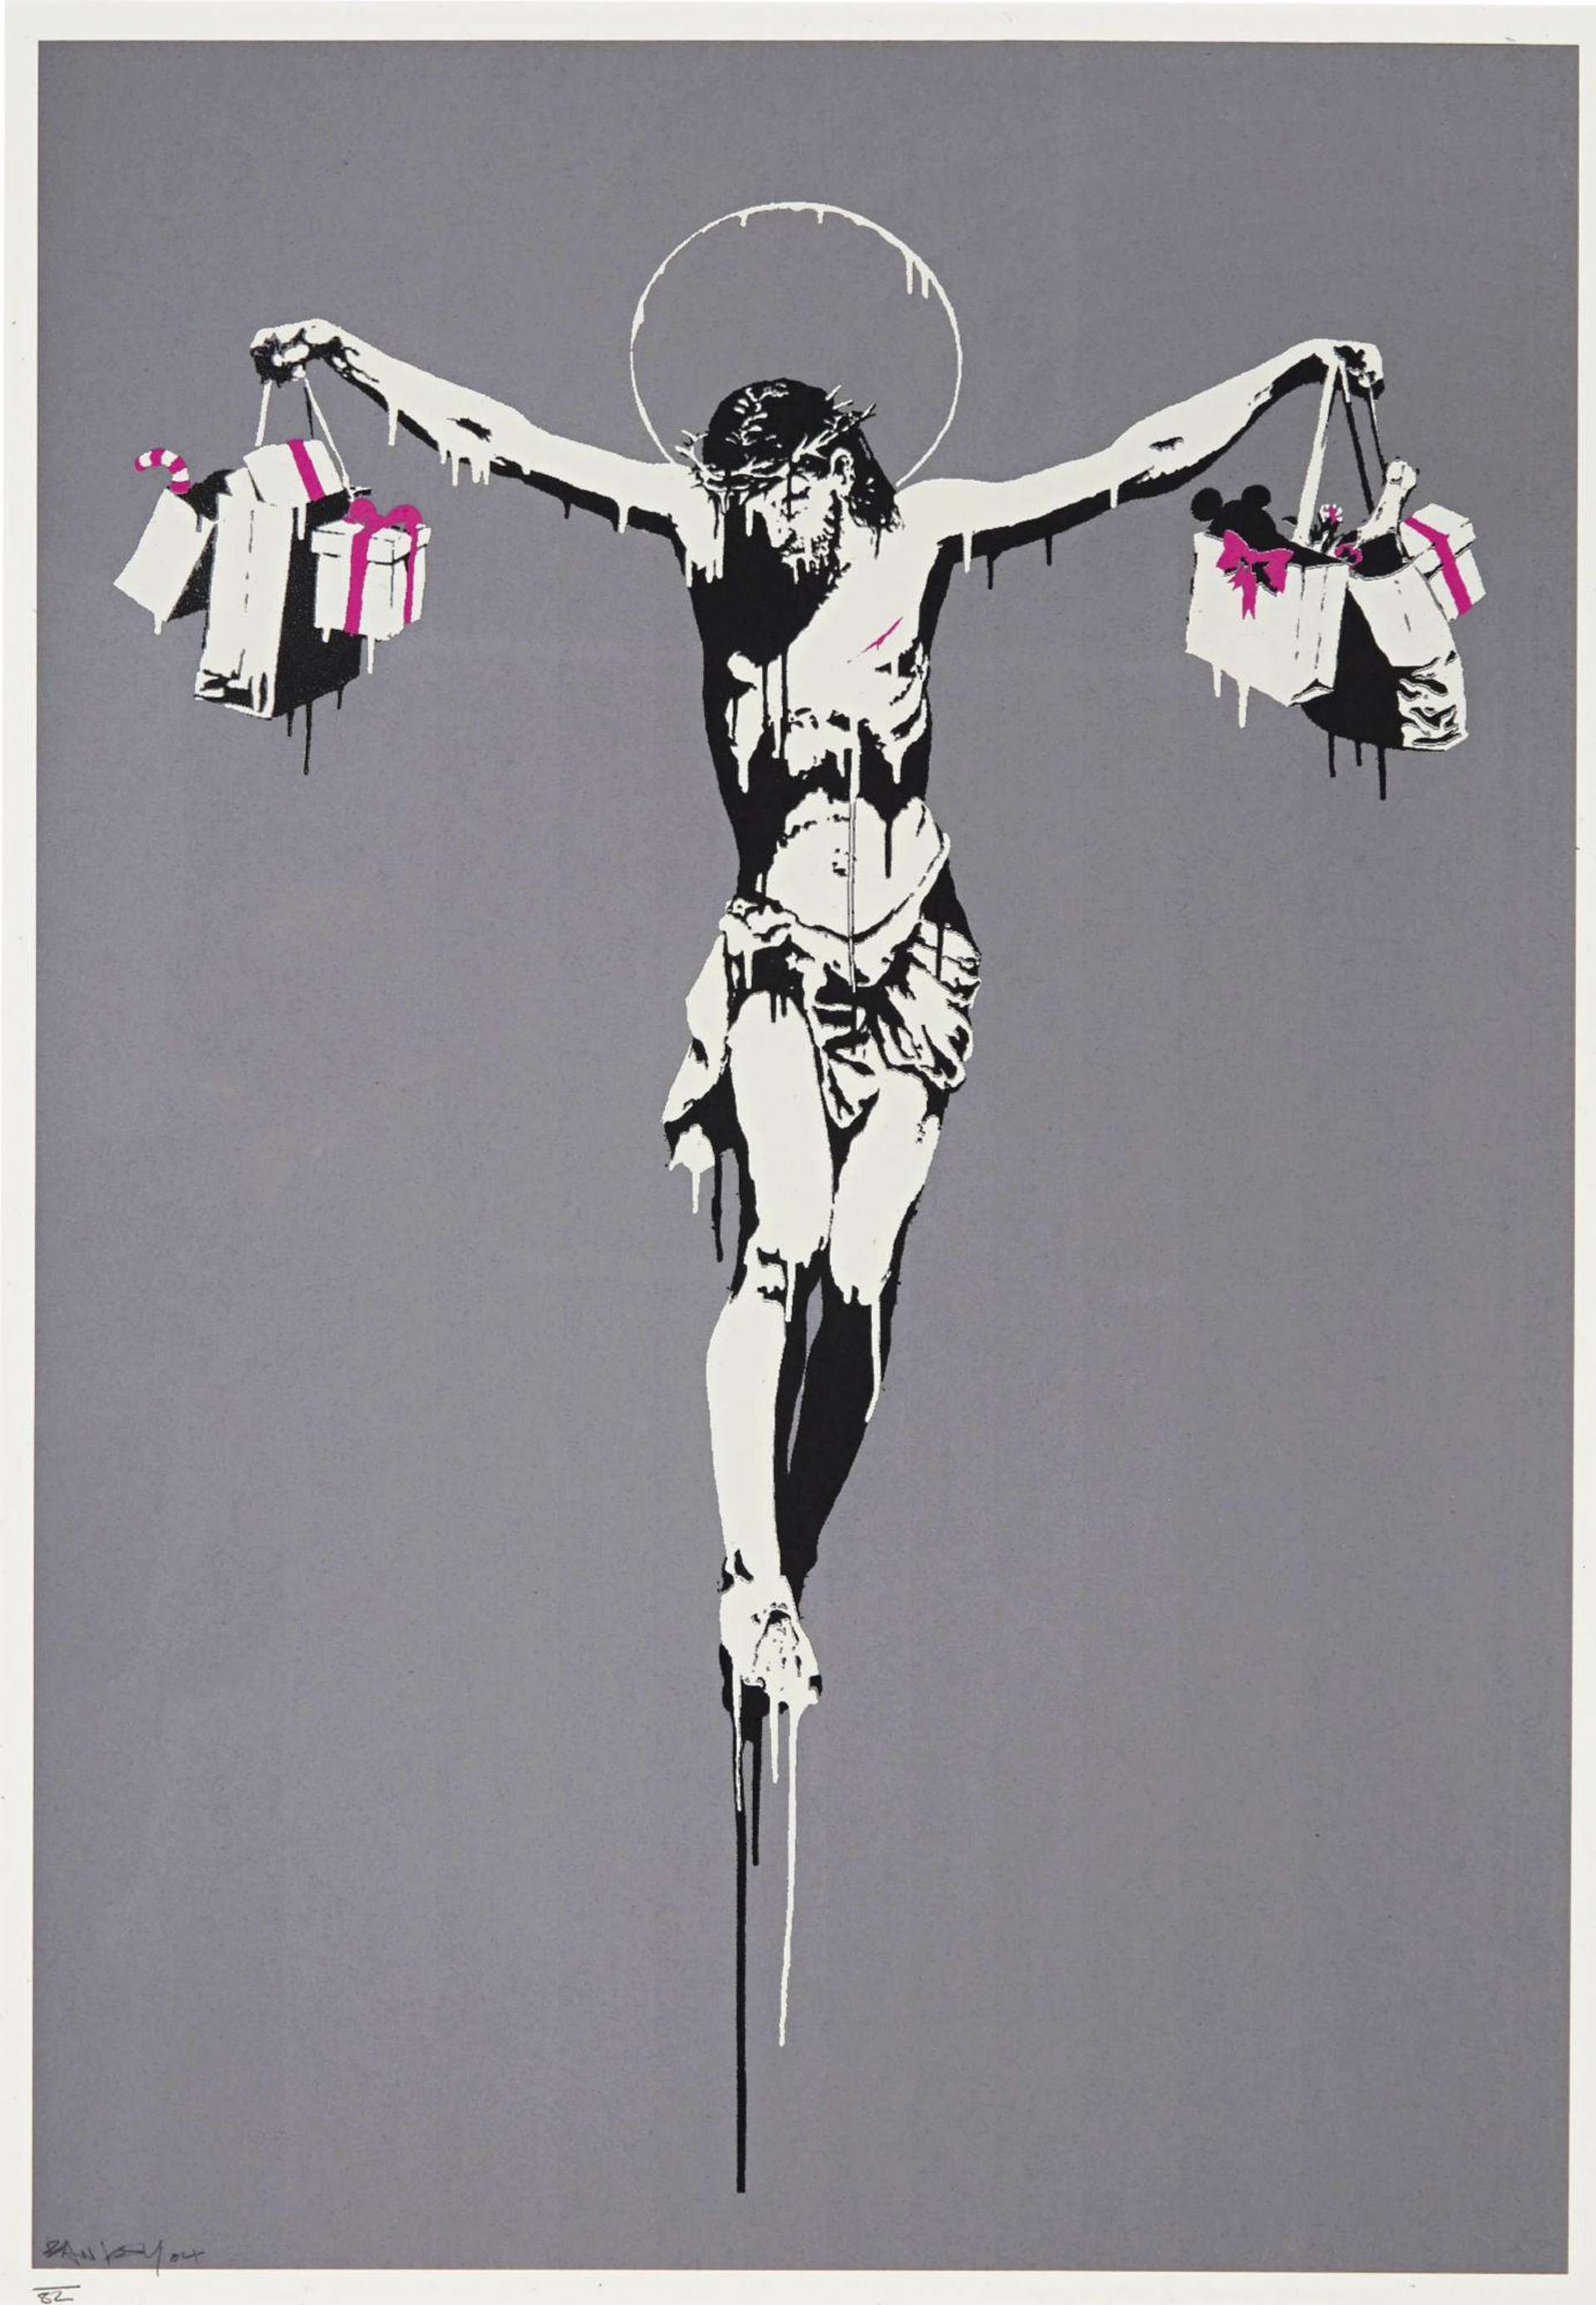 Christ With Shopping Bags - Signed Print by Banksy 2004 - MyArtBroker